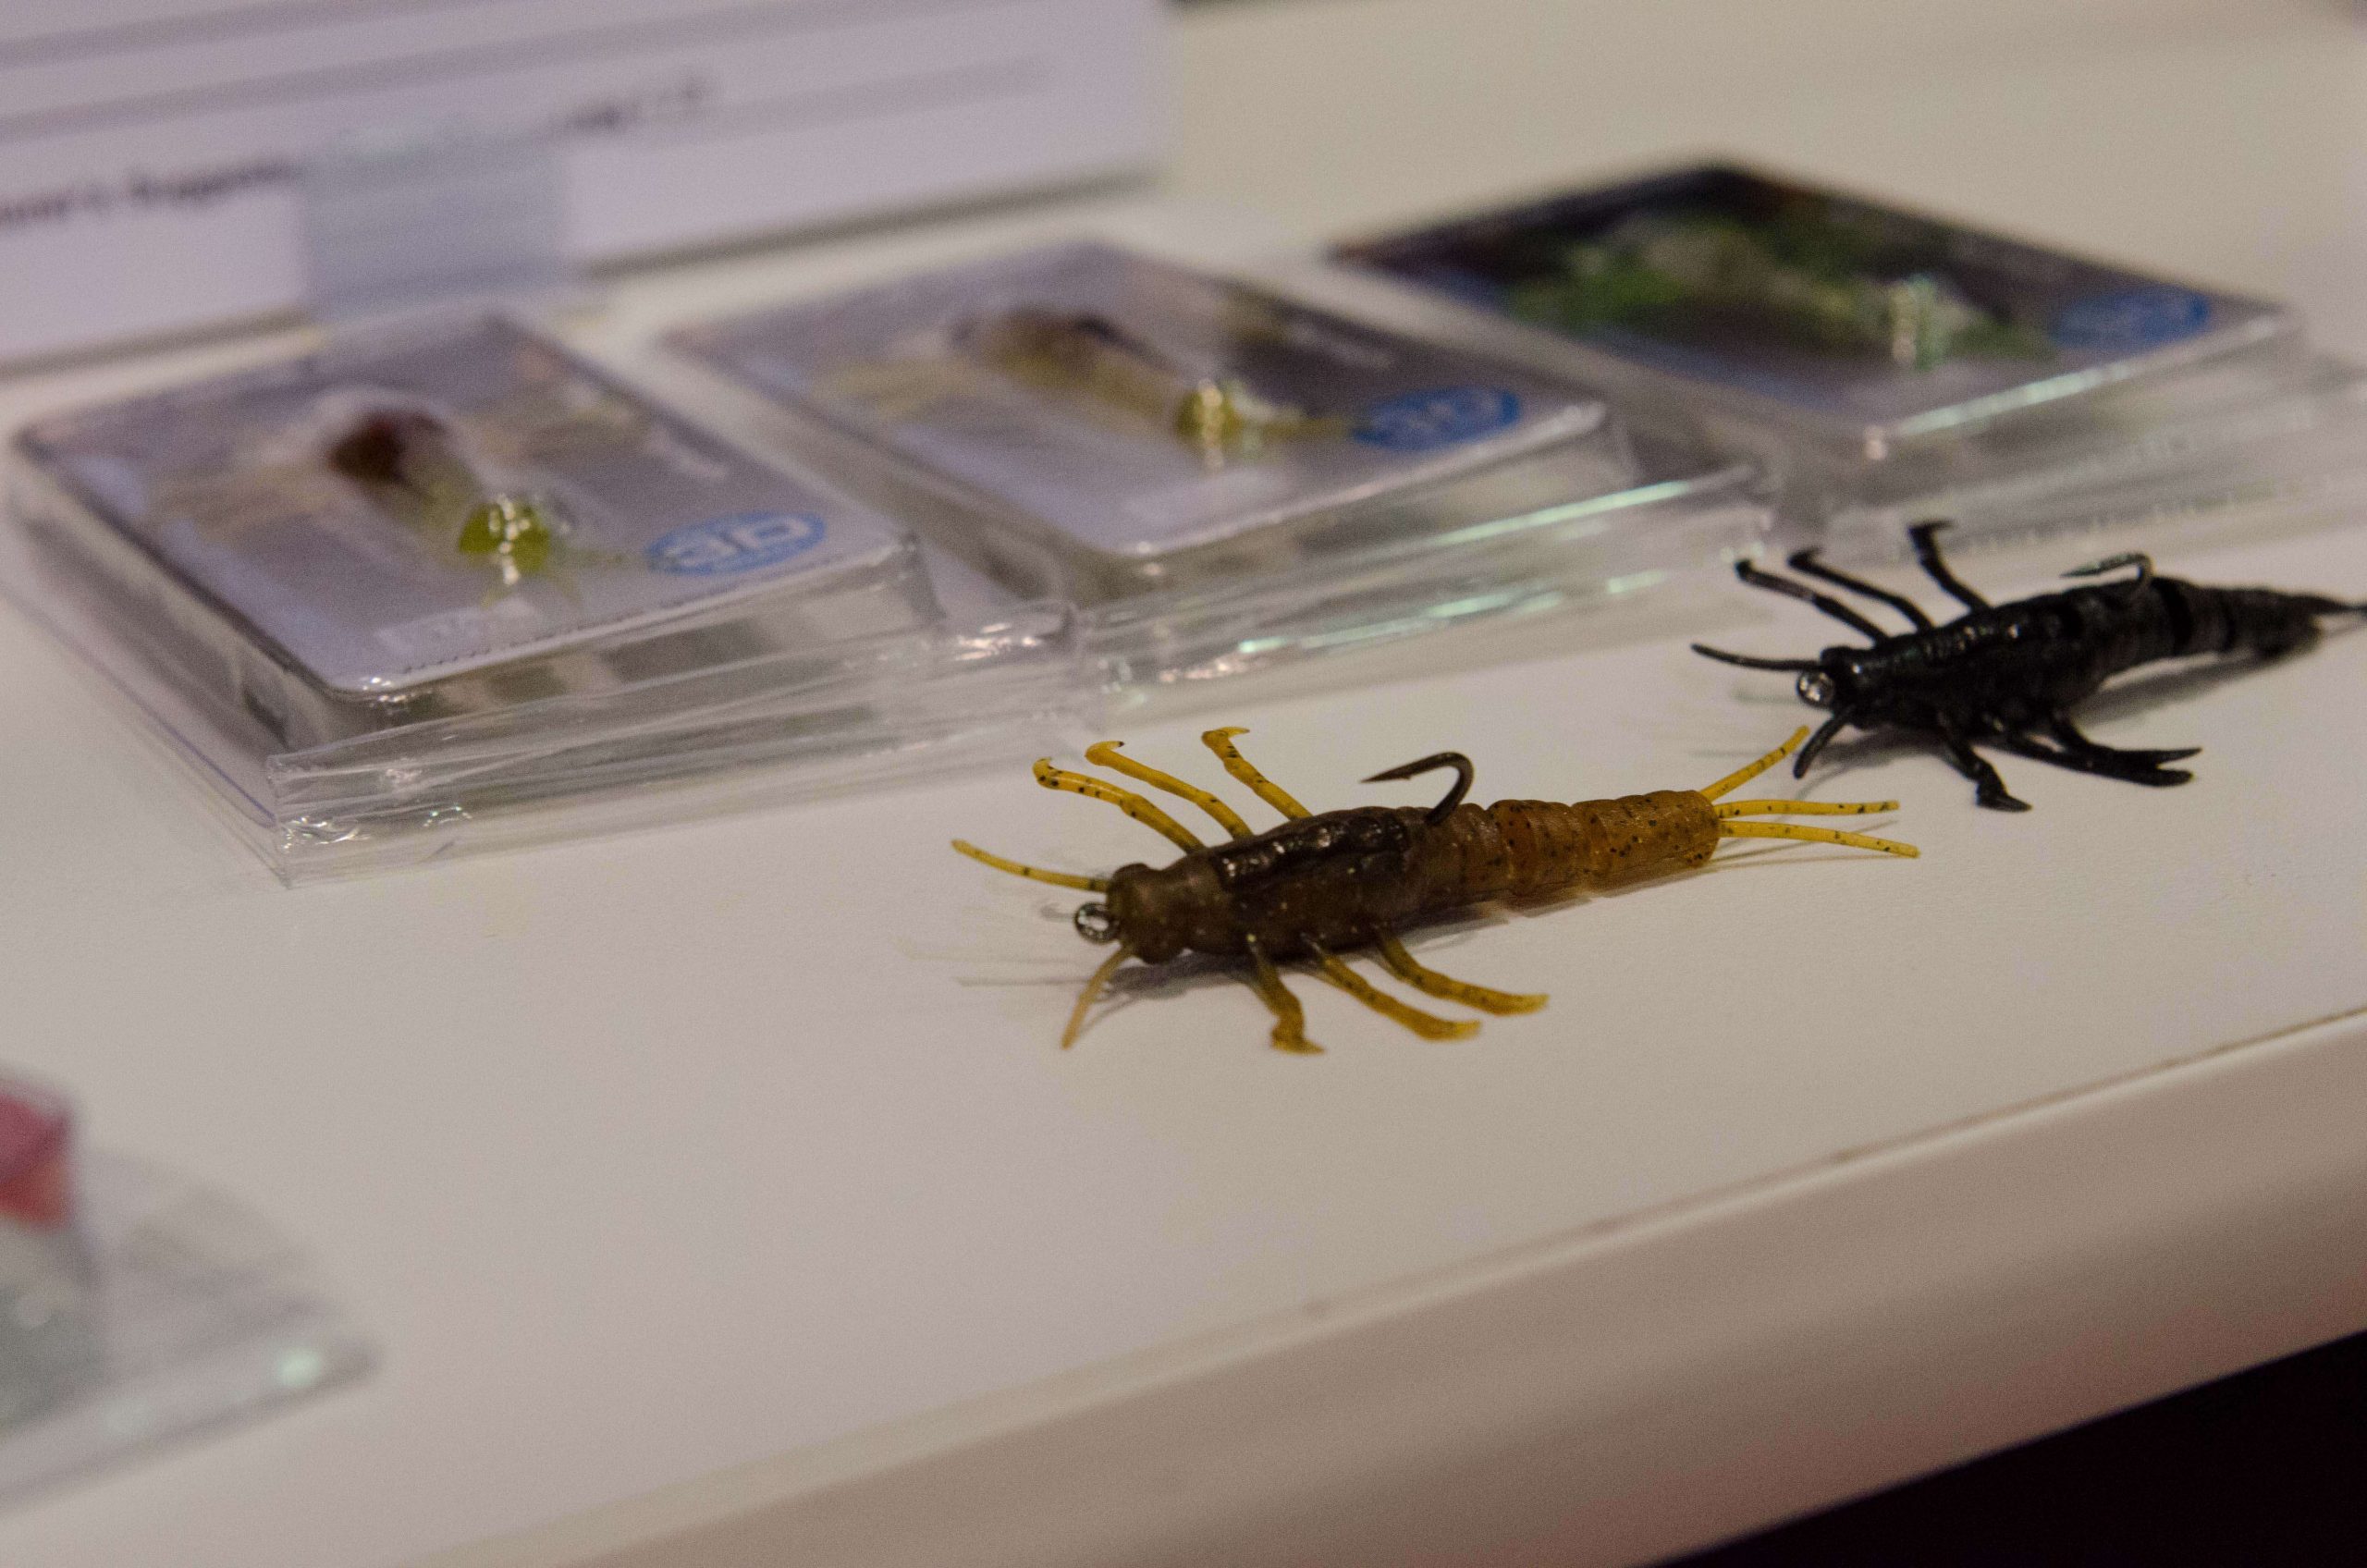 Soft lures and hard lures were a popular choice. Shown here are 3D TPE Mayfly Nymphs soft lures by Savage Gear USA.